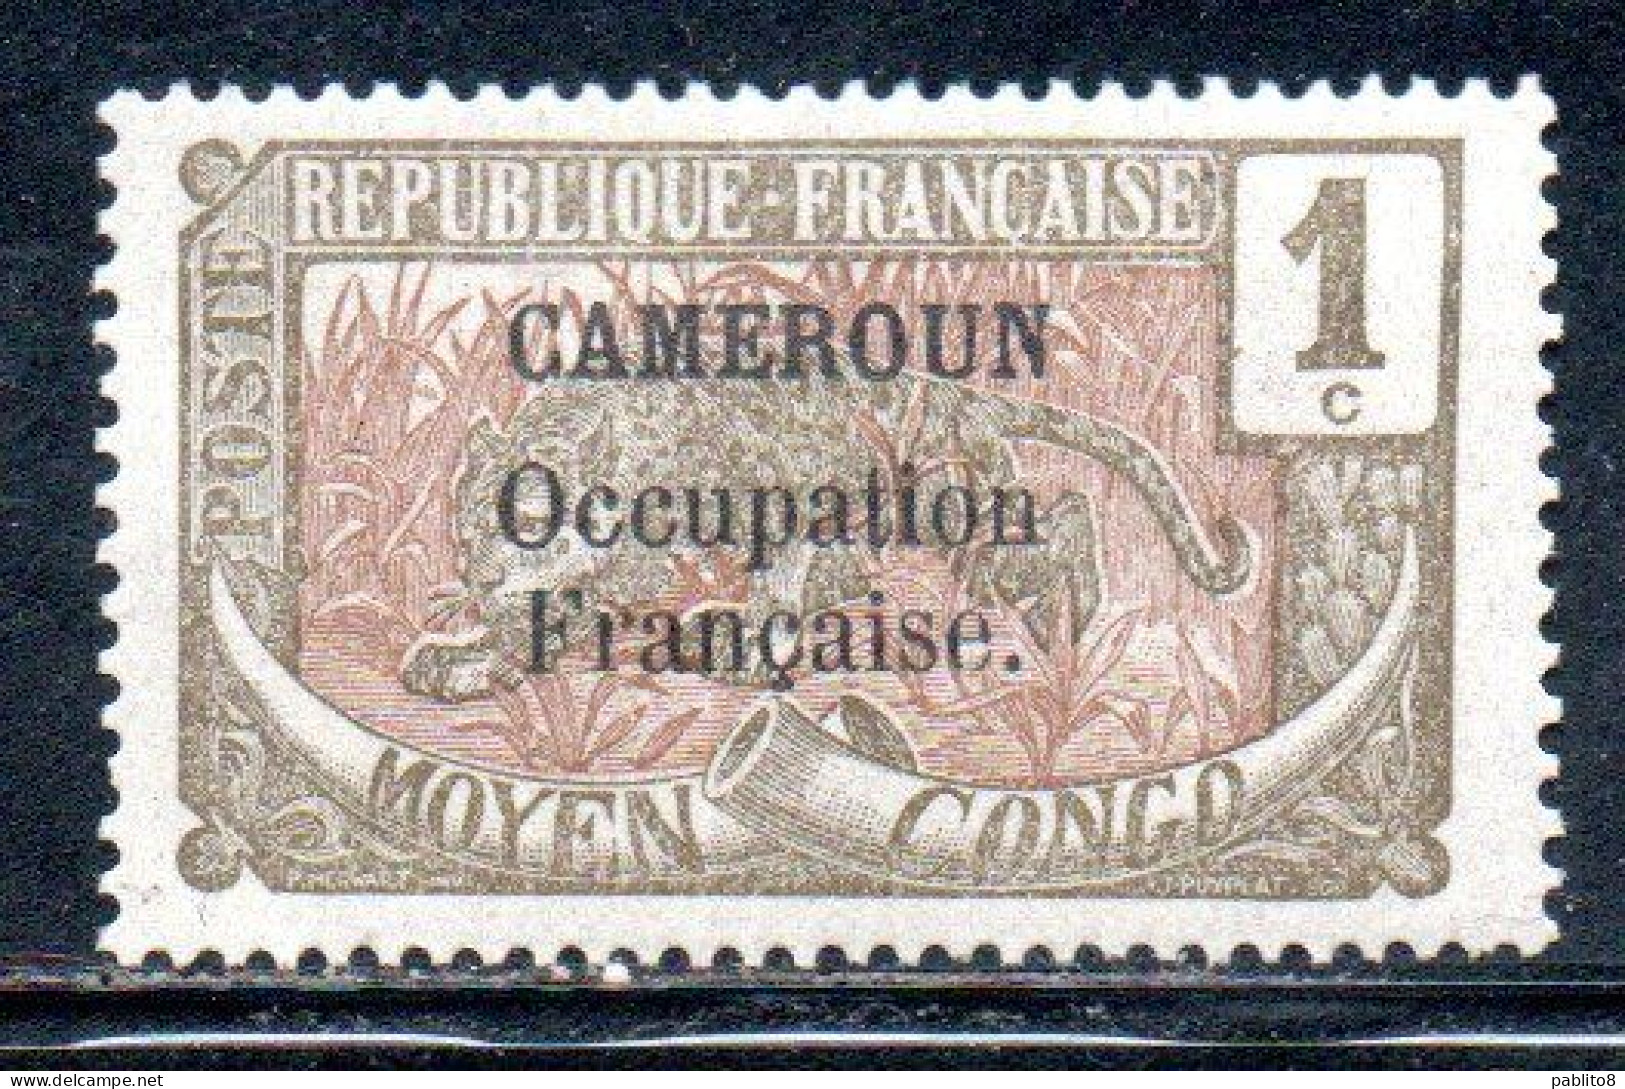 CAMEROUN CAMERUN 1916 1917 CONGO STAMPS SURCHARGE OVERPRINTED PROVISIONAL FRENCH MANDATE 1c MH - Neufs